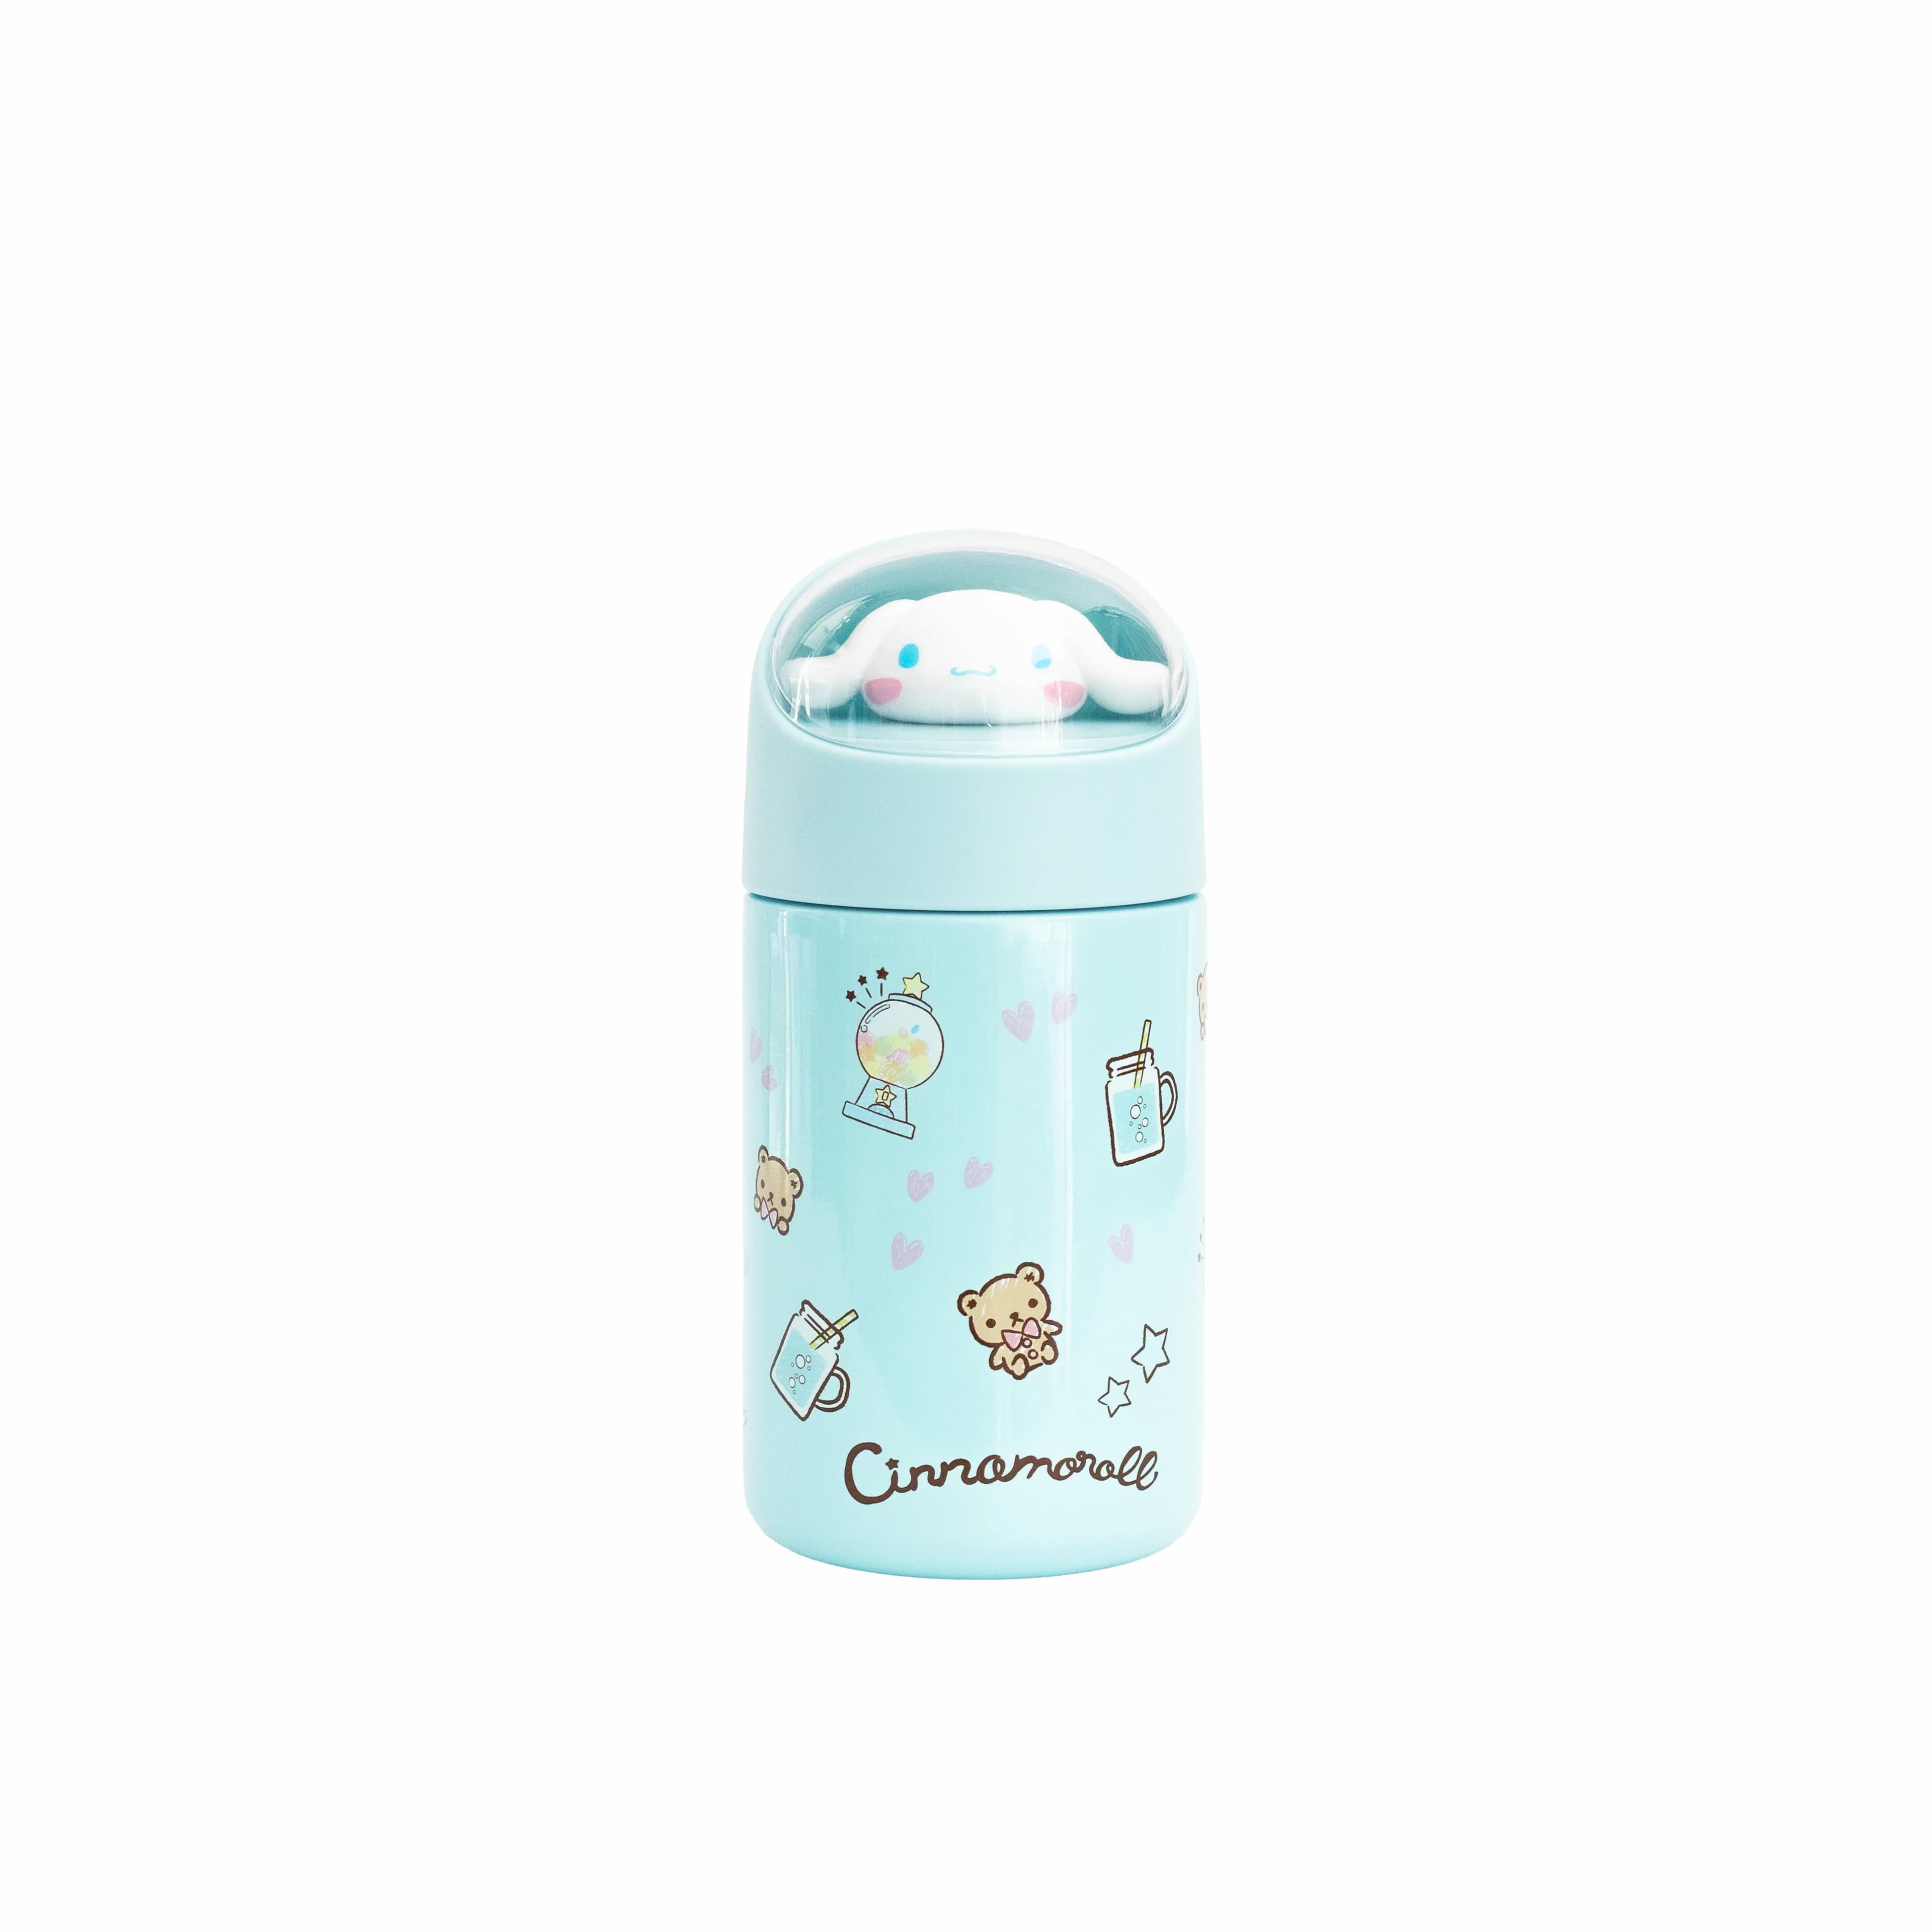 Sanrio Character Stainless Steel Thermos - Cinnamoroll